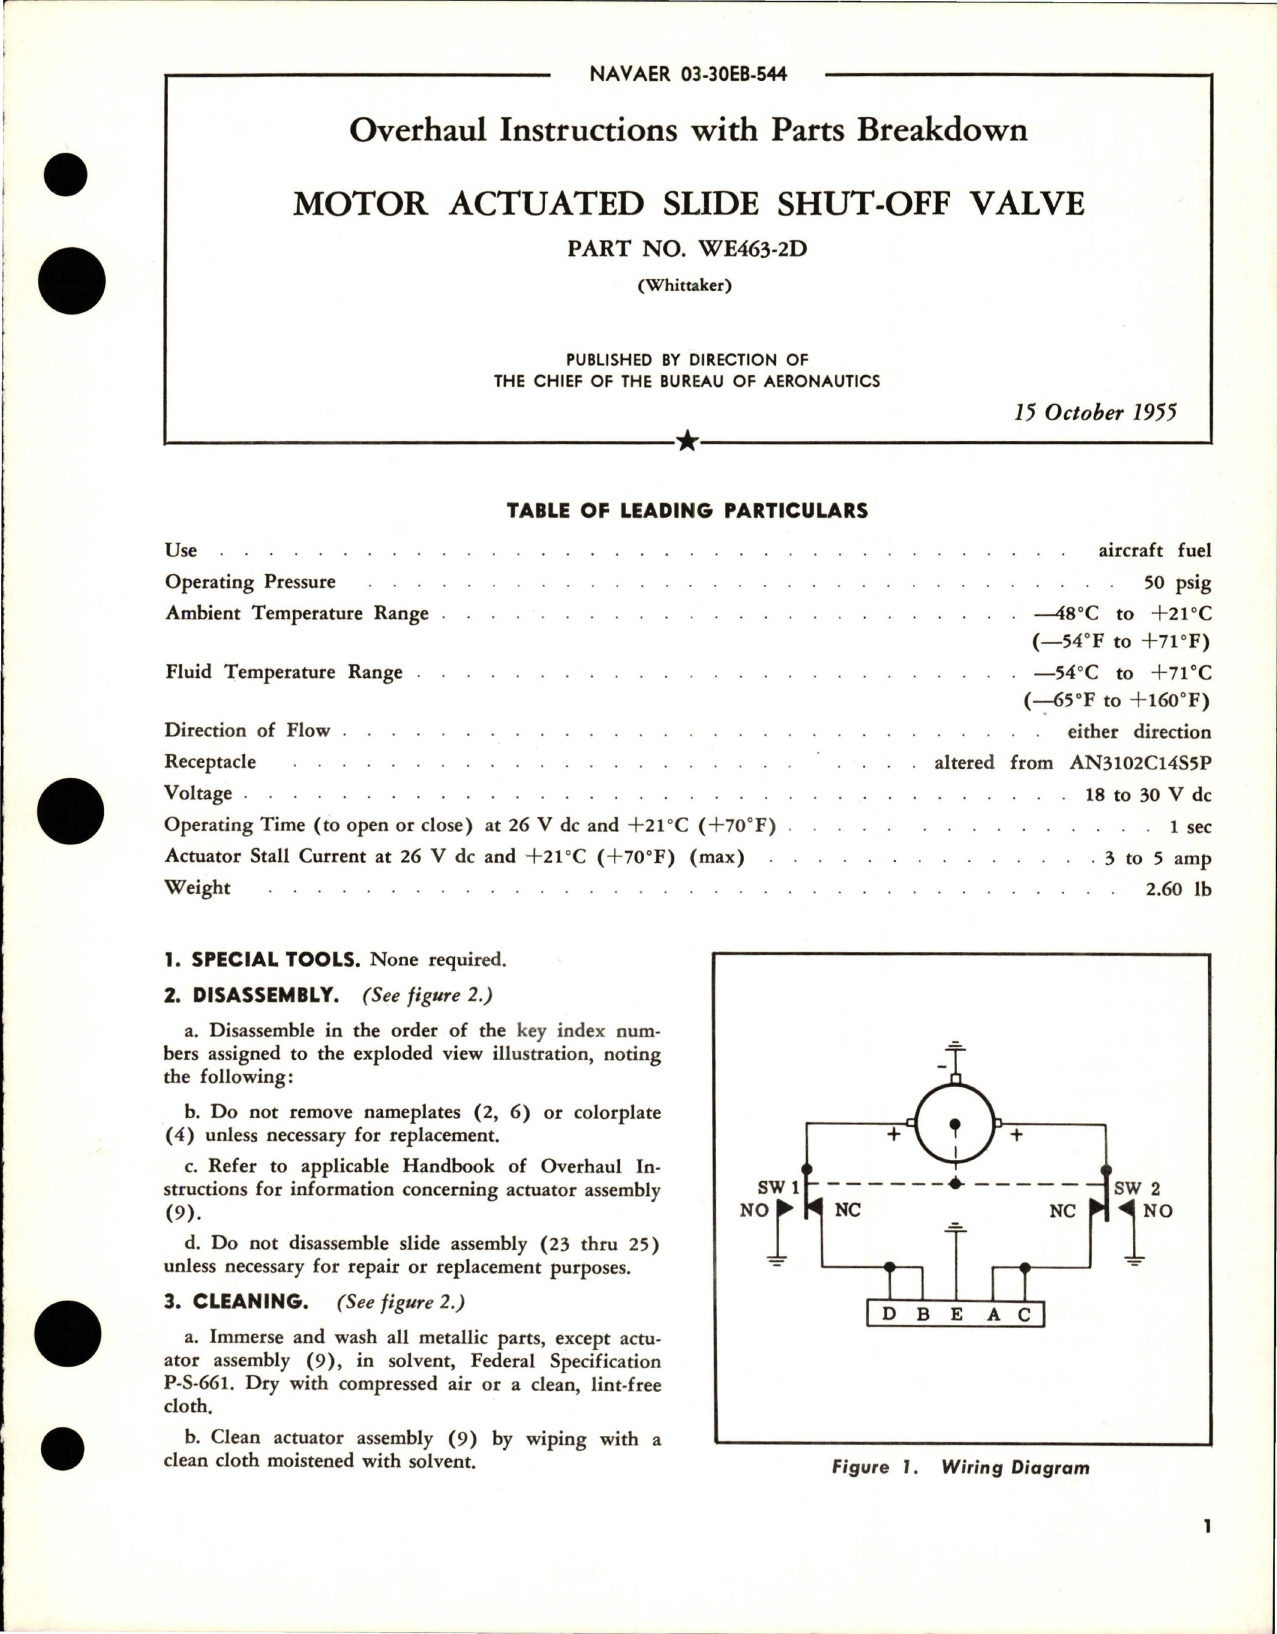 Sample page 1 from AirCorps Library document: Overhaul Instructions with Parts for Motor Actuated Slide Shut Off Valve - Part WE5463-2D